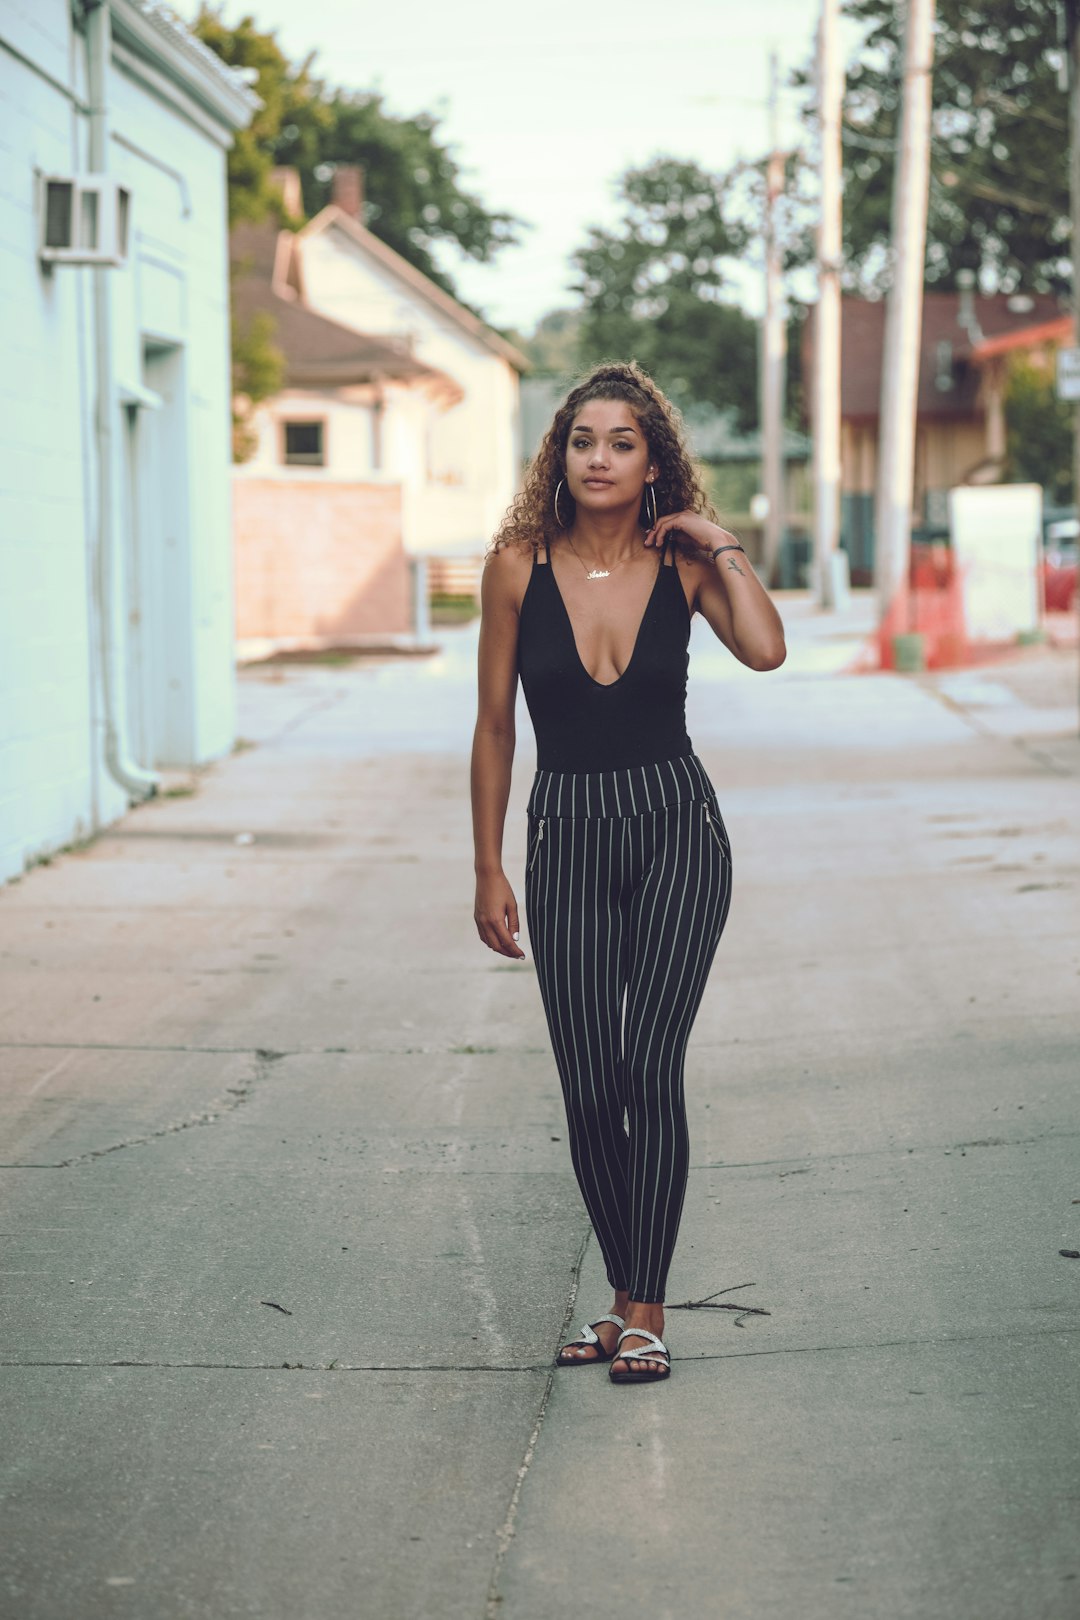 woman in black tank top and black and white striped pants standing on gray concrete pavement